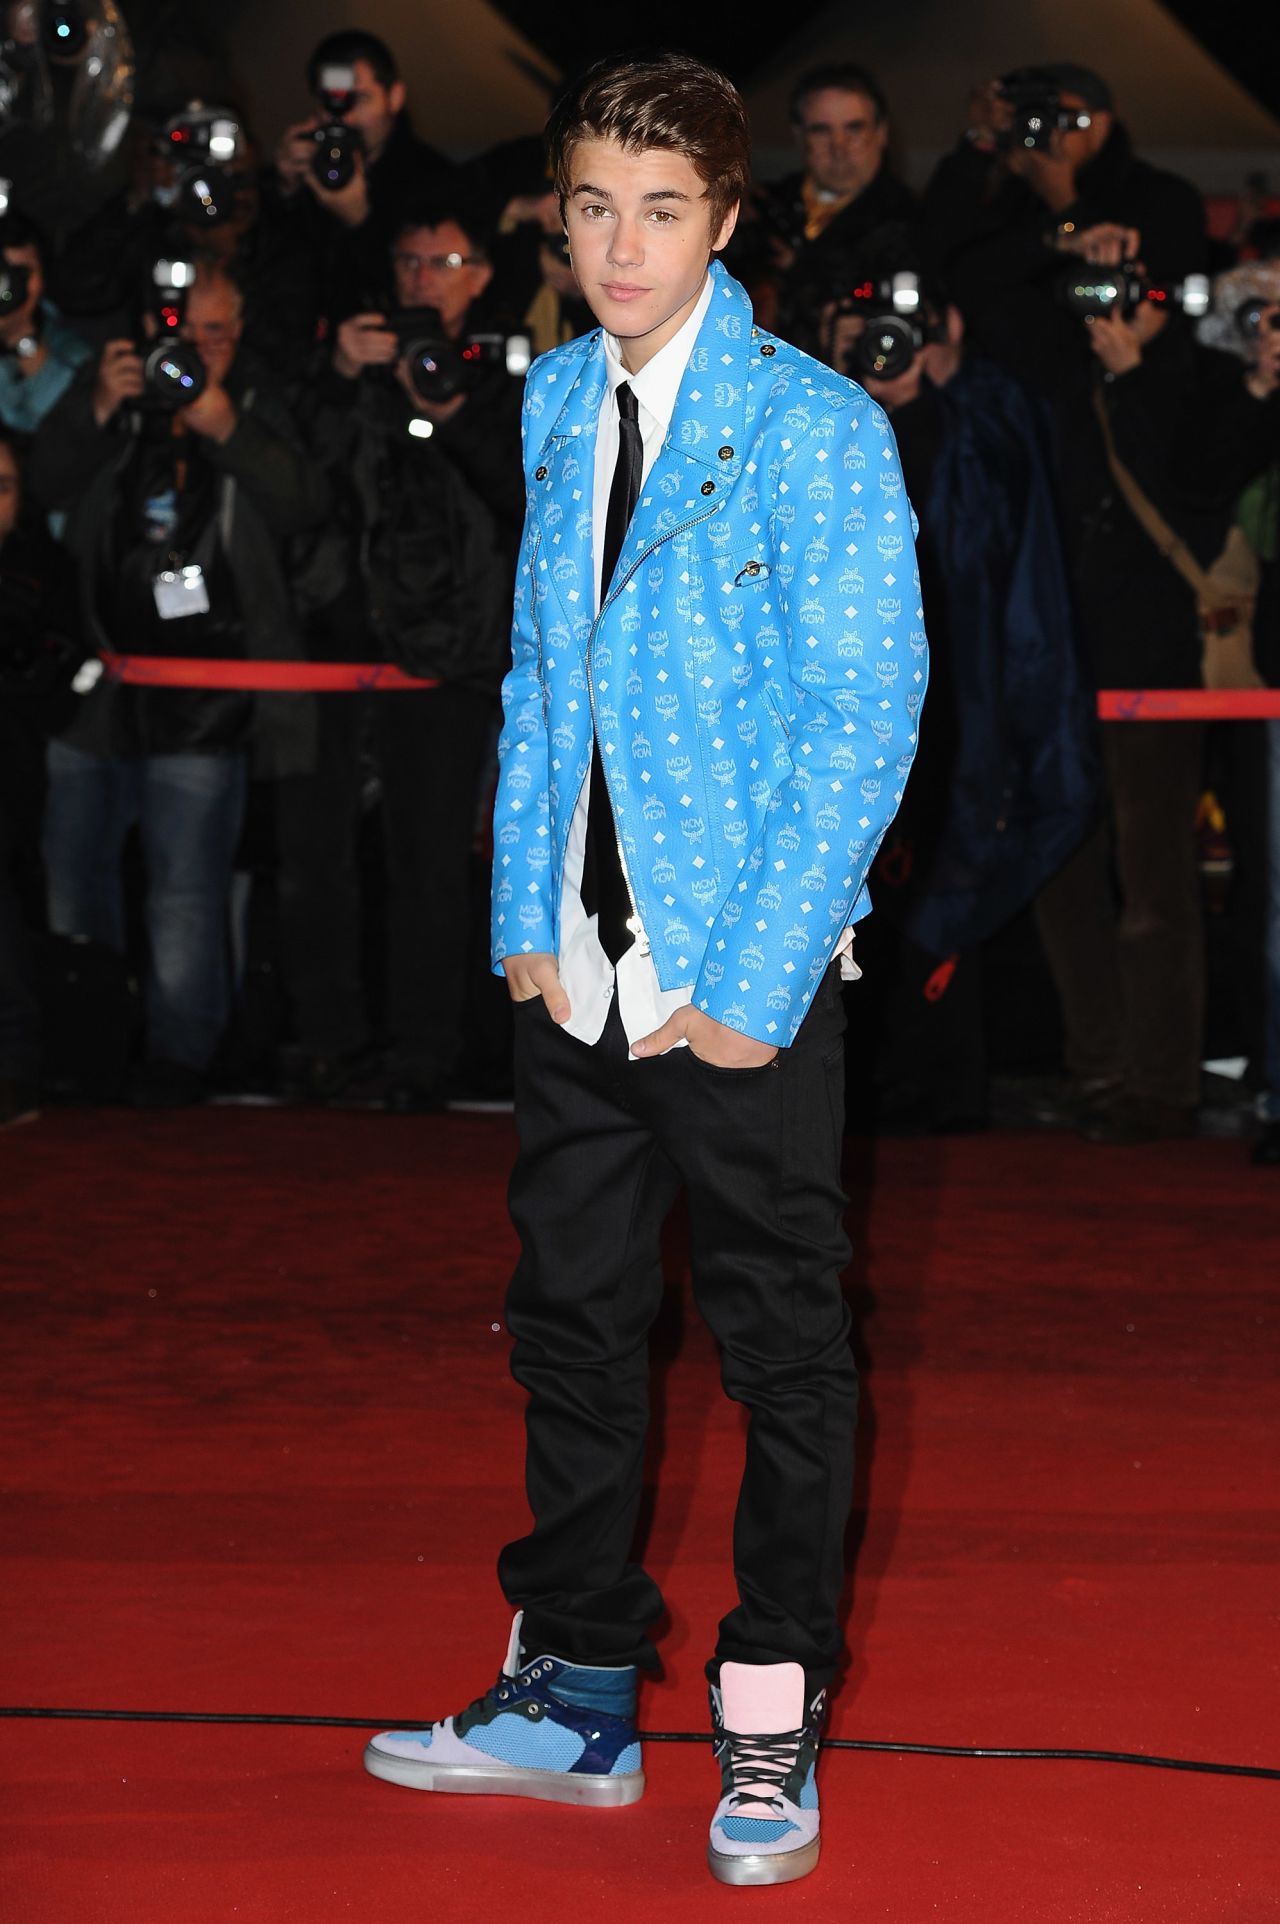 The Biebs attends the NRJ Music Awards in January 2012, but he stays busy giving back when he's not hitting the red carpet. A month later<a href="http://marquee.blogs.cnn.com/2012/02/15/justin-bieber-gives-child-battling-cancer-dream-date/">, he made a special Valentine's Day trip</a> to a girl suffering from cancer. Photos he shared from their time together quickly went viral. 